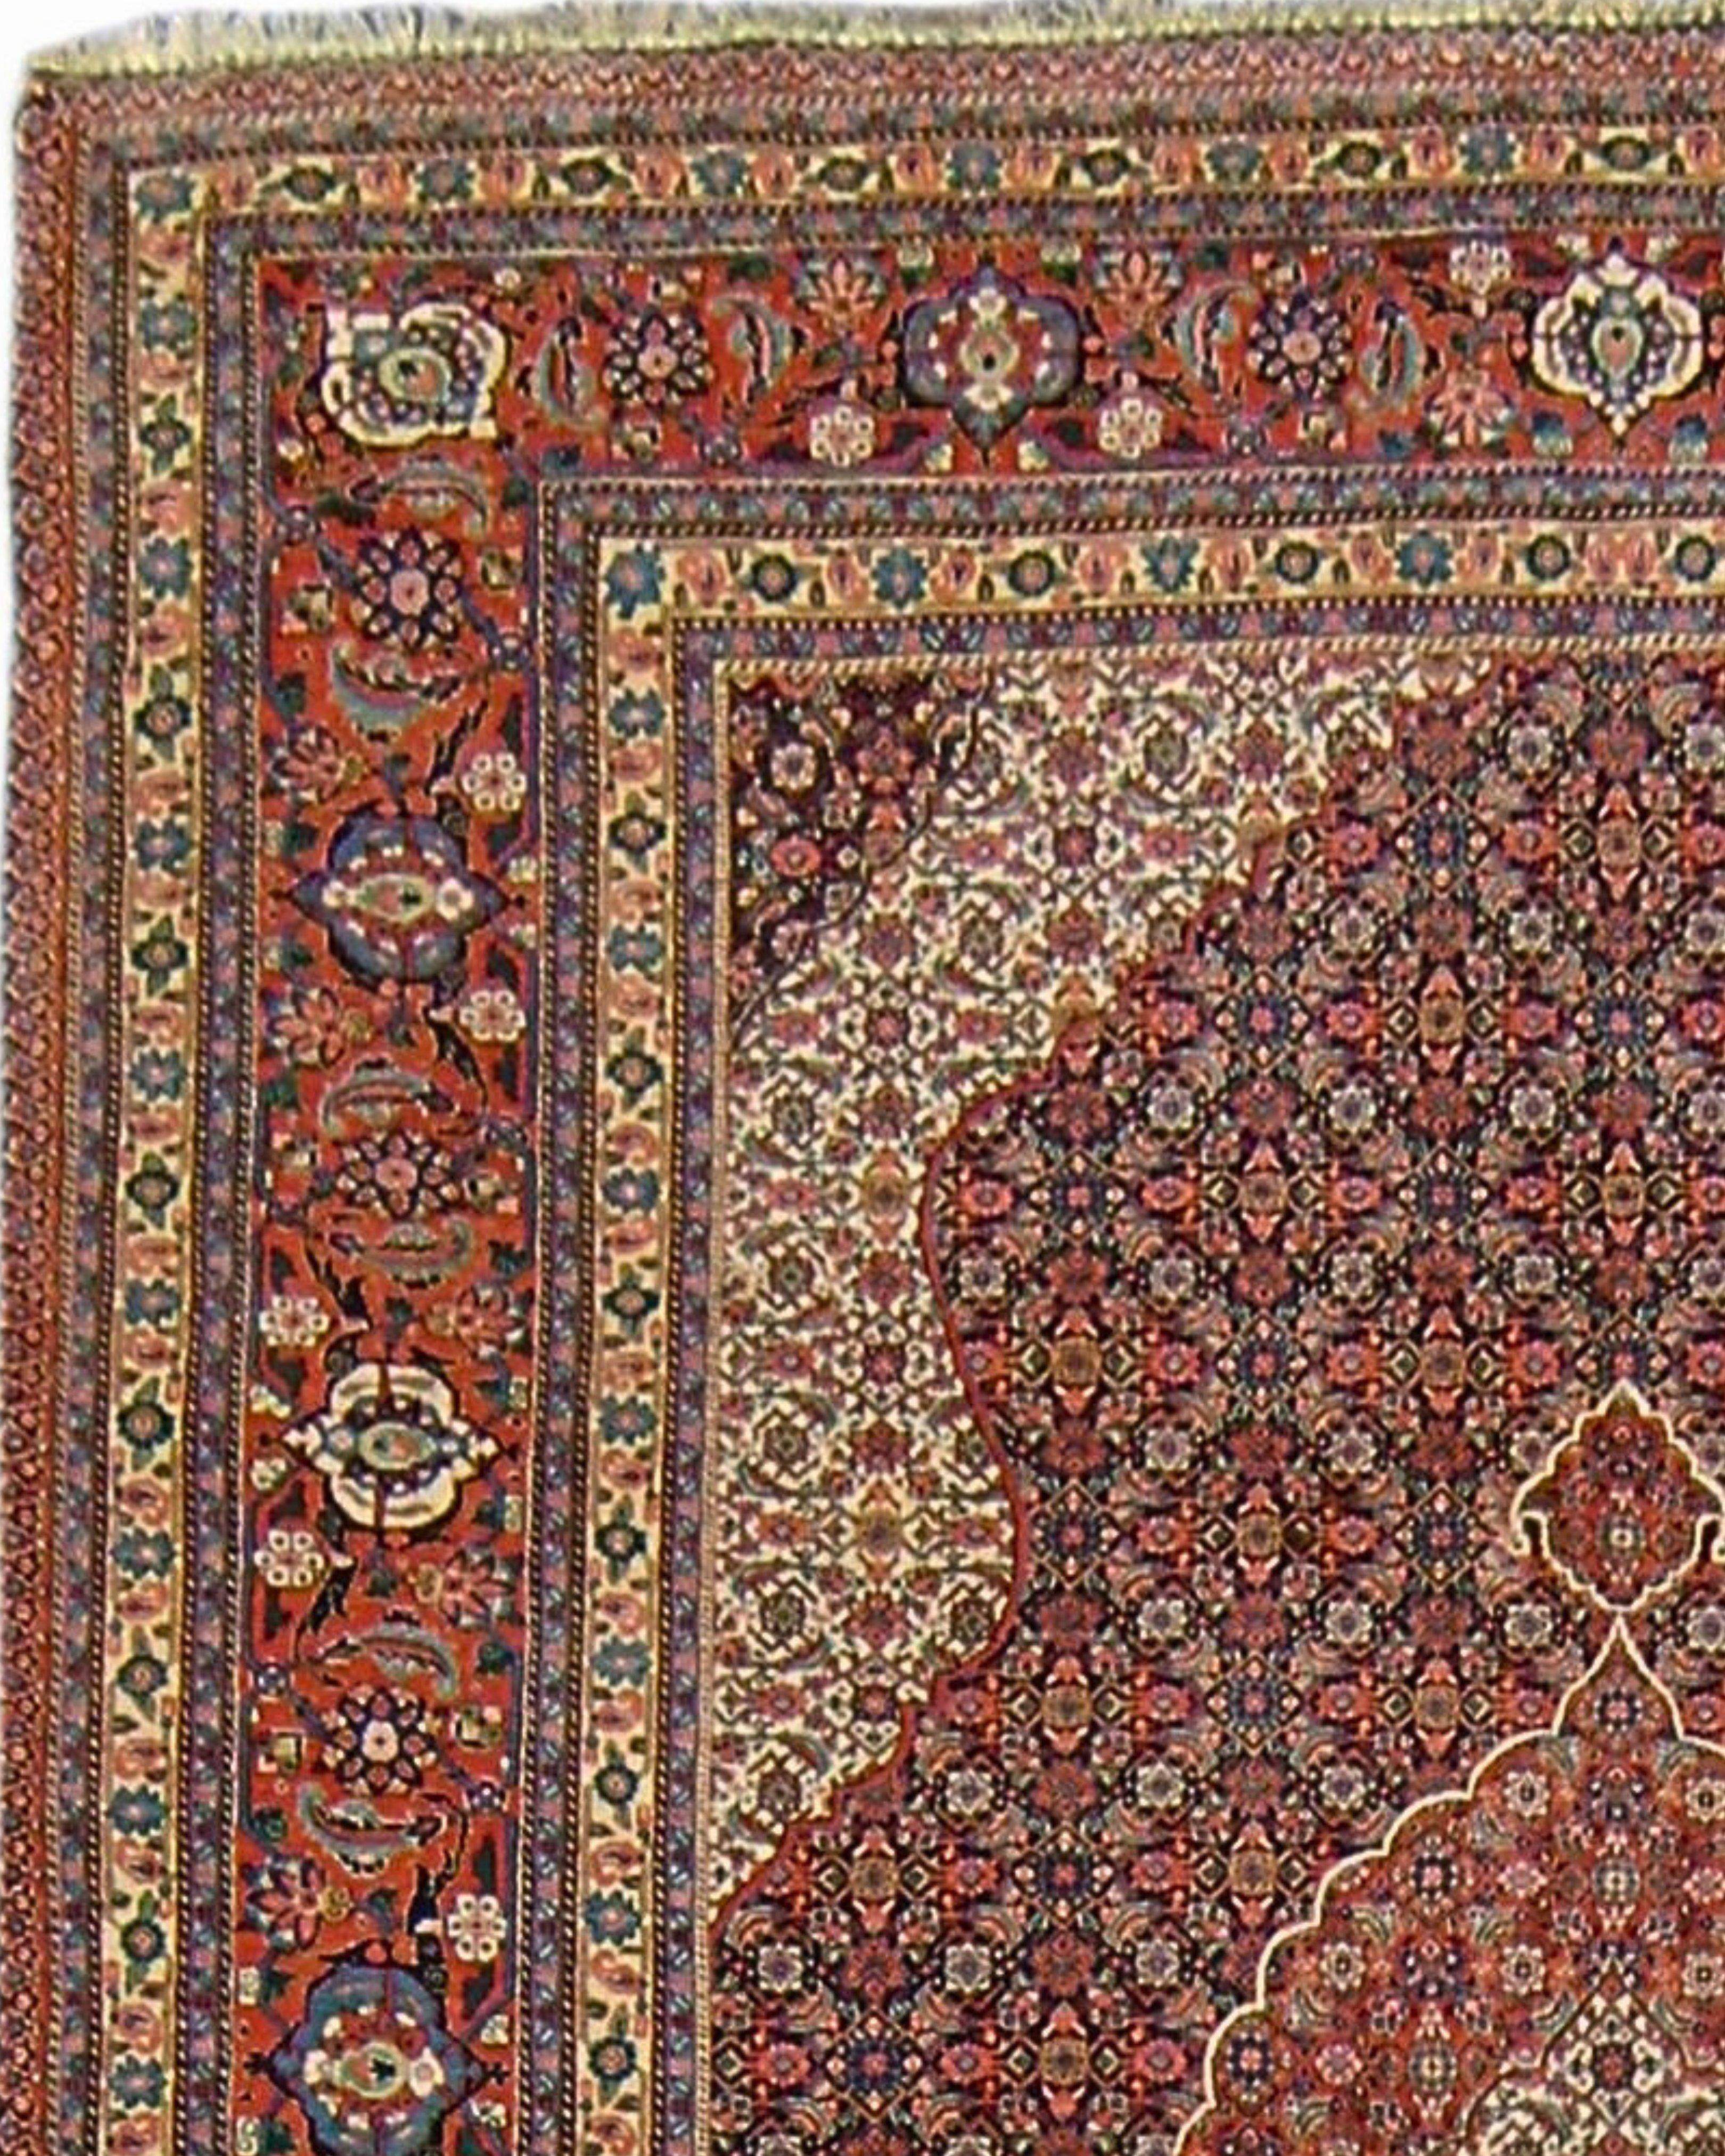 Hand-Knotted Vintage Persian Tabriz Rug, c. 1970 For Sale